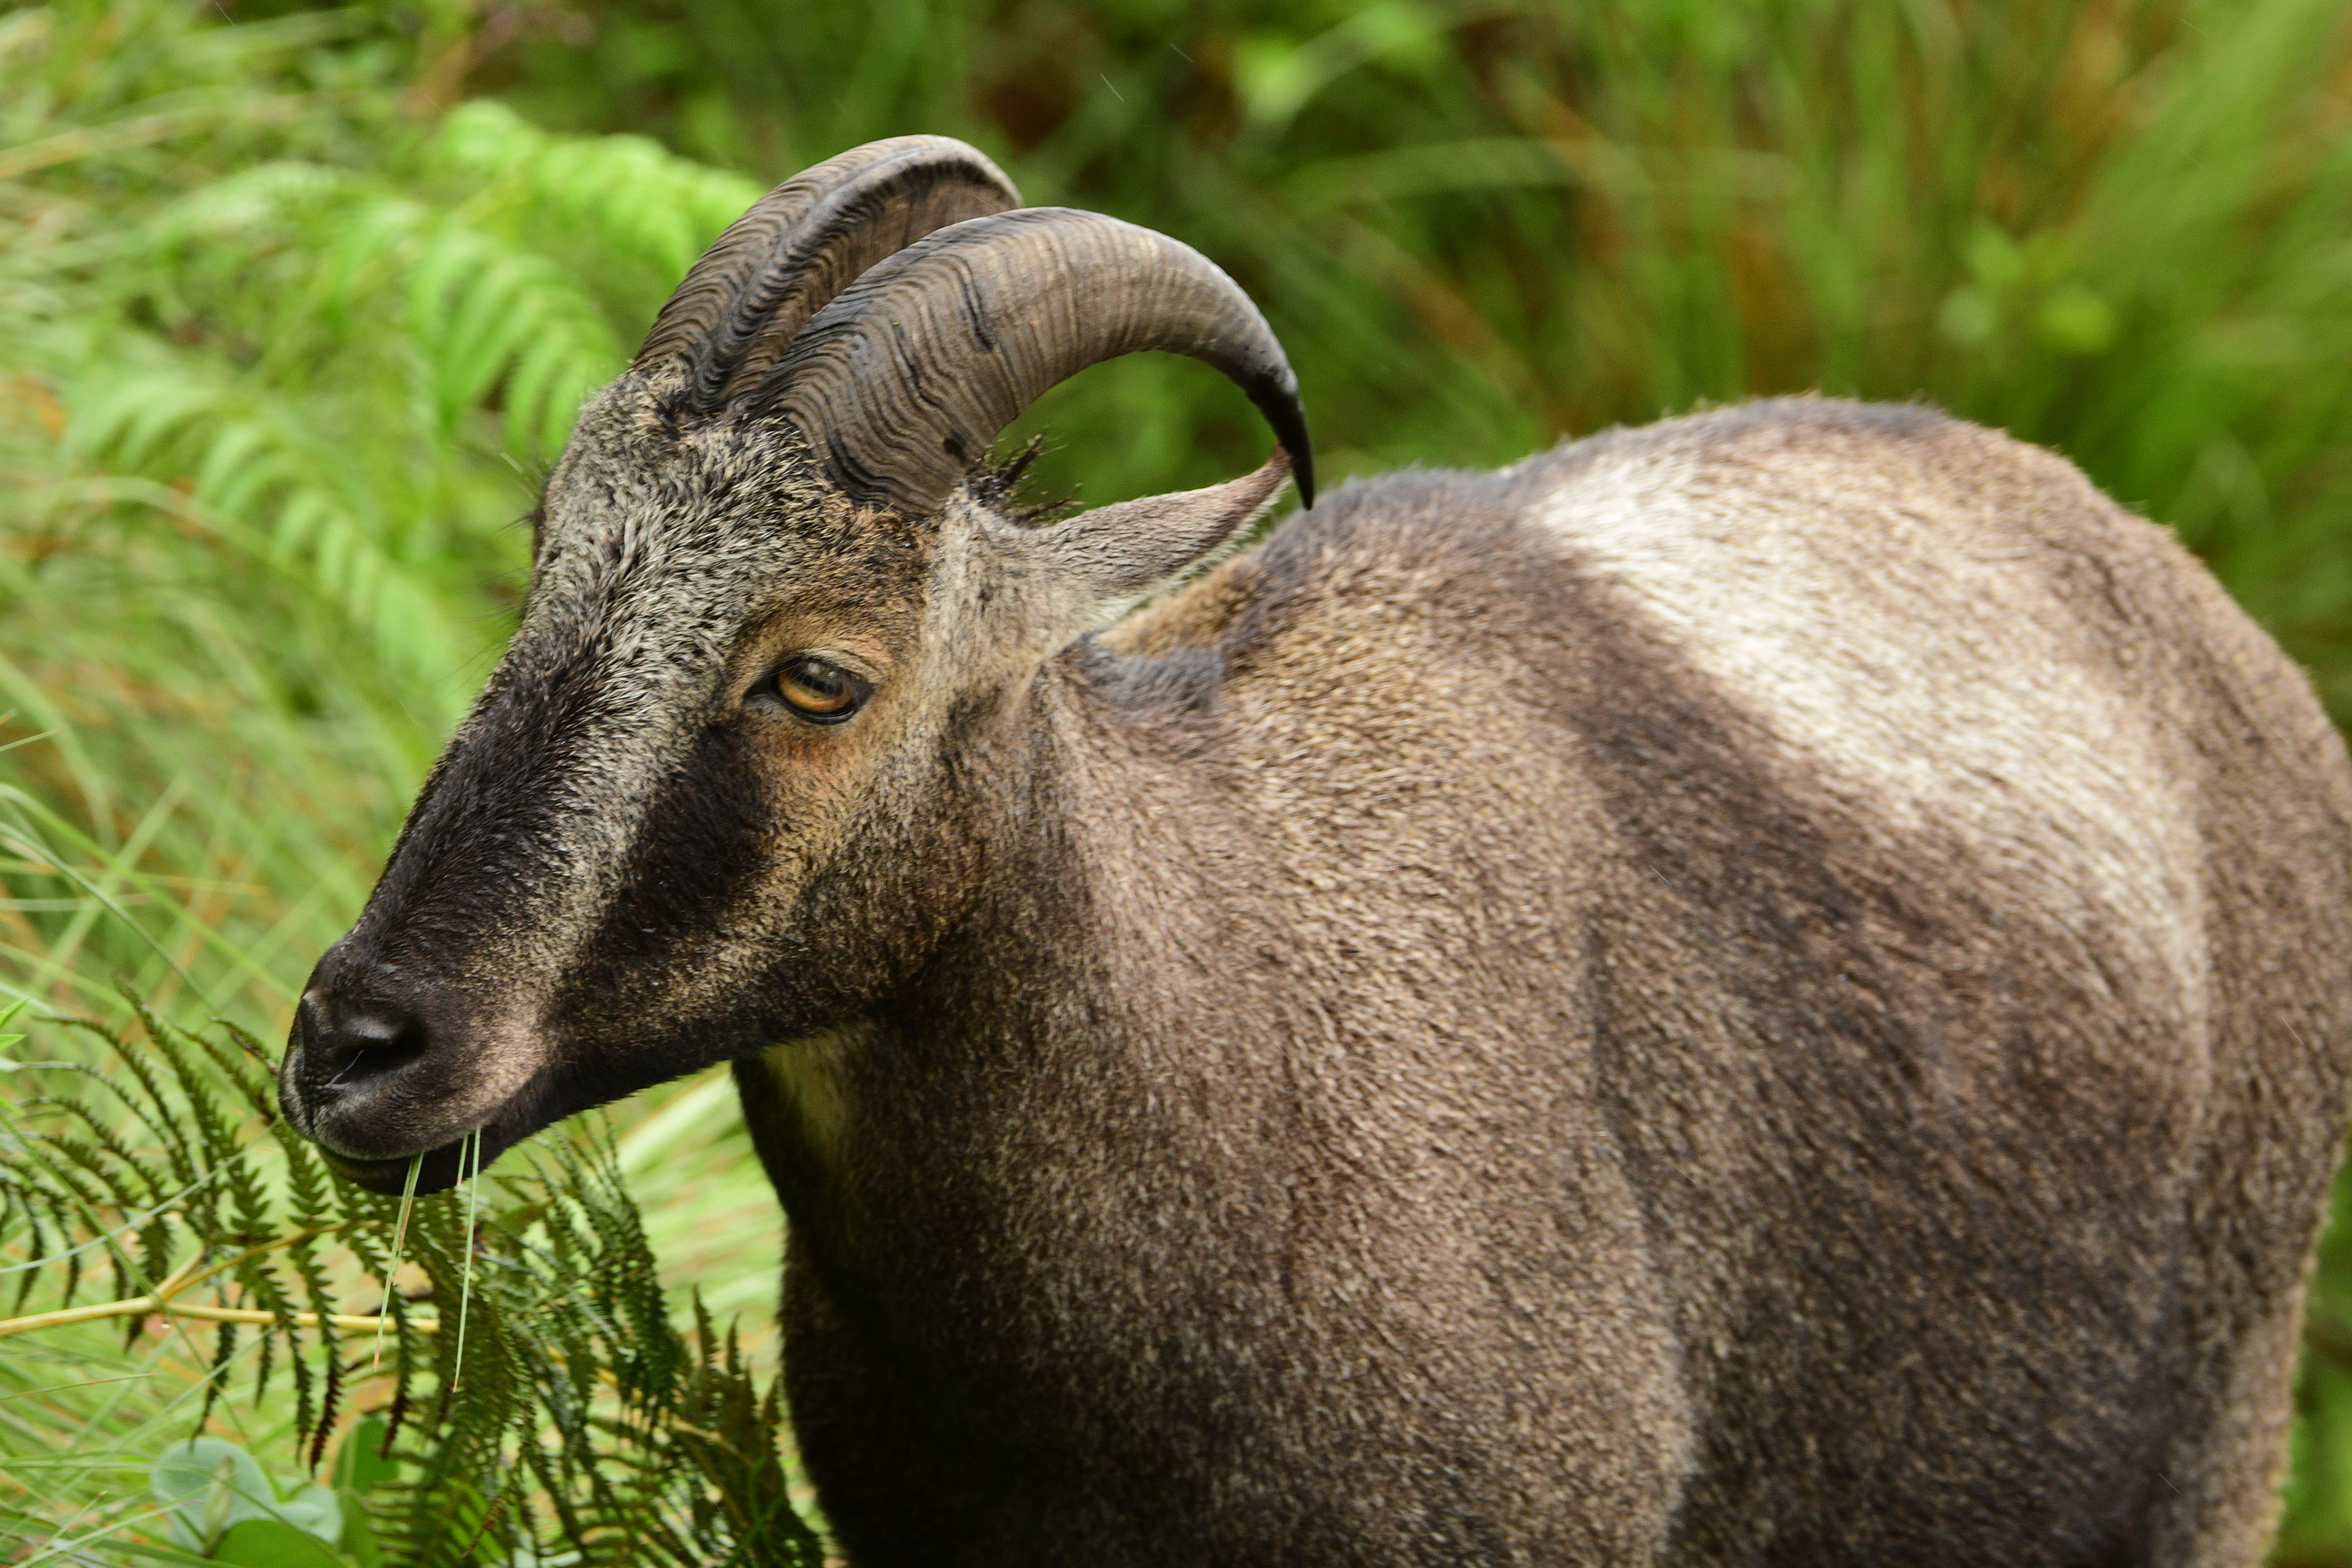 Nilgiri Tahrs are found only in the high-altitude grasslands of Western Ghats. Today, they are endangered due to the loss of habitat.